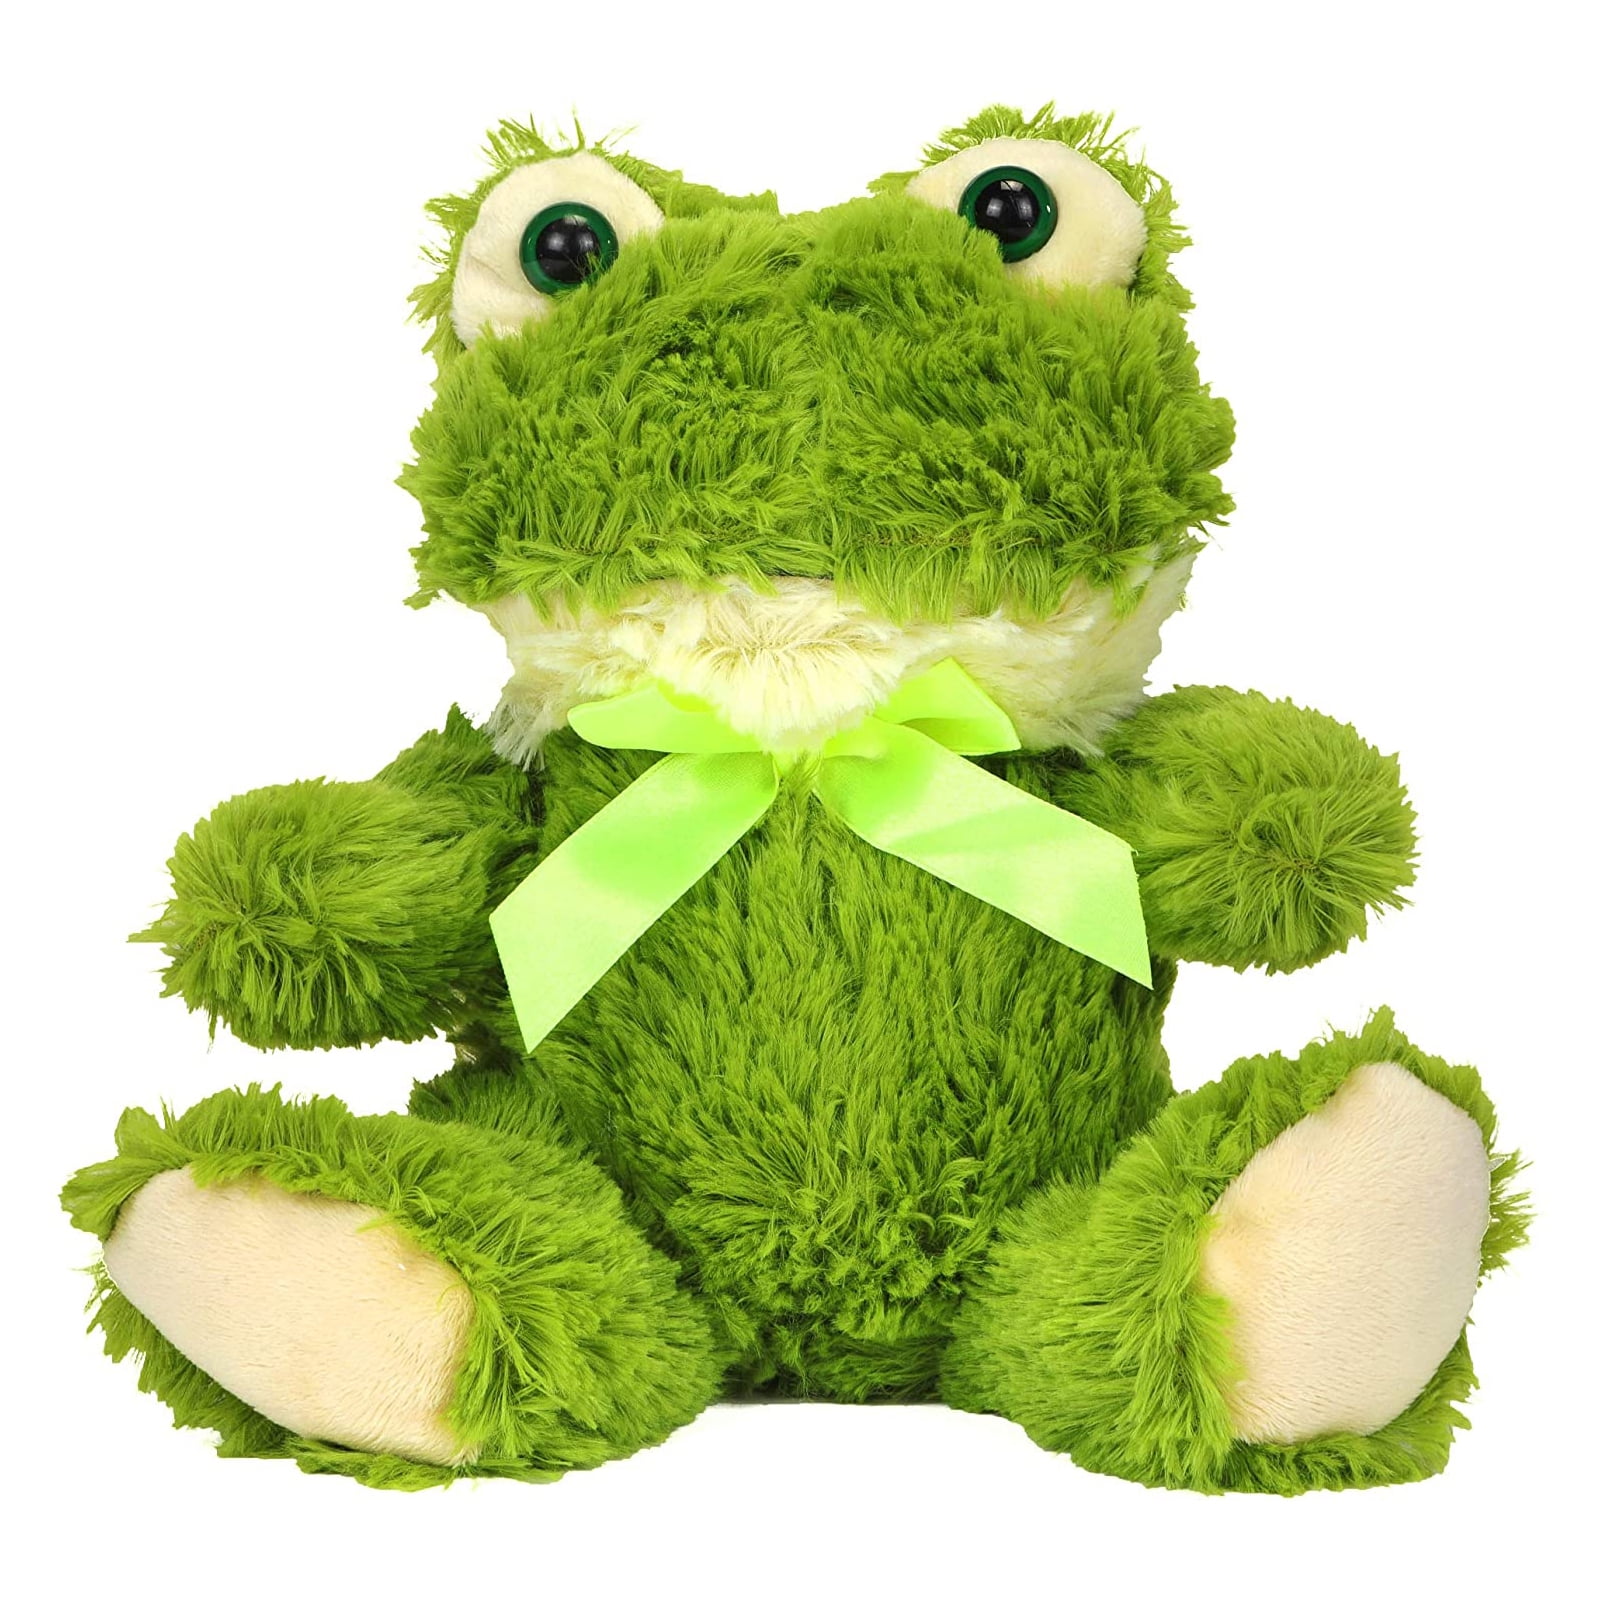 Fluffy Bowknot Frog Plush Toy | Safe, Durable, and Huggable Stuffed Animal